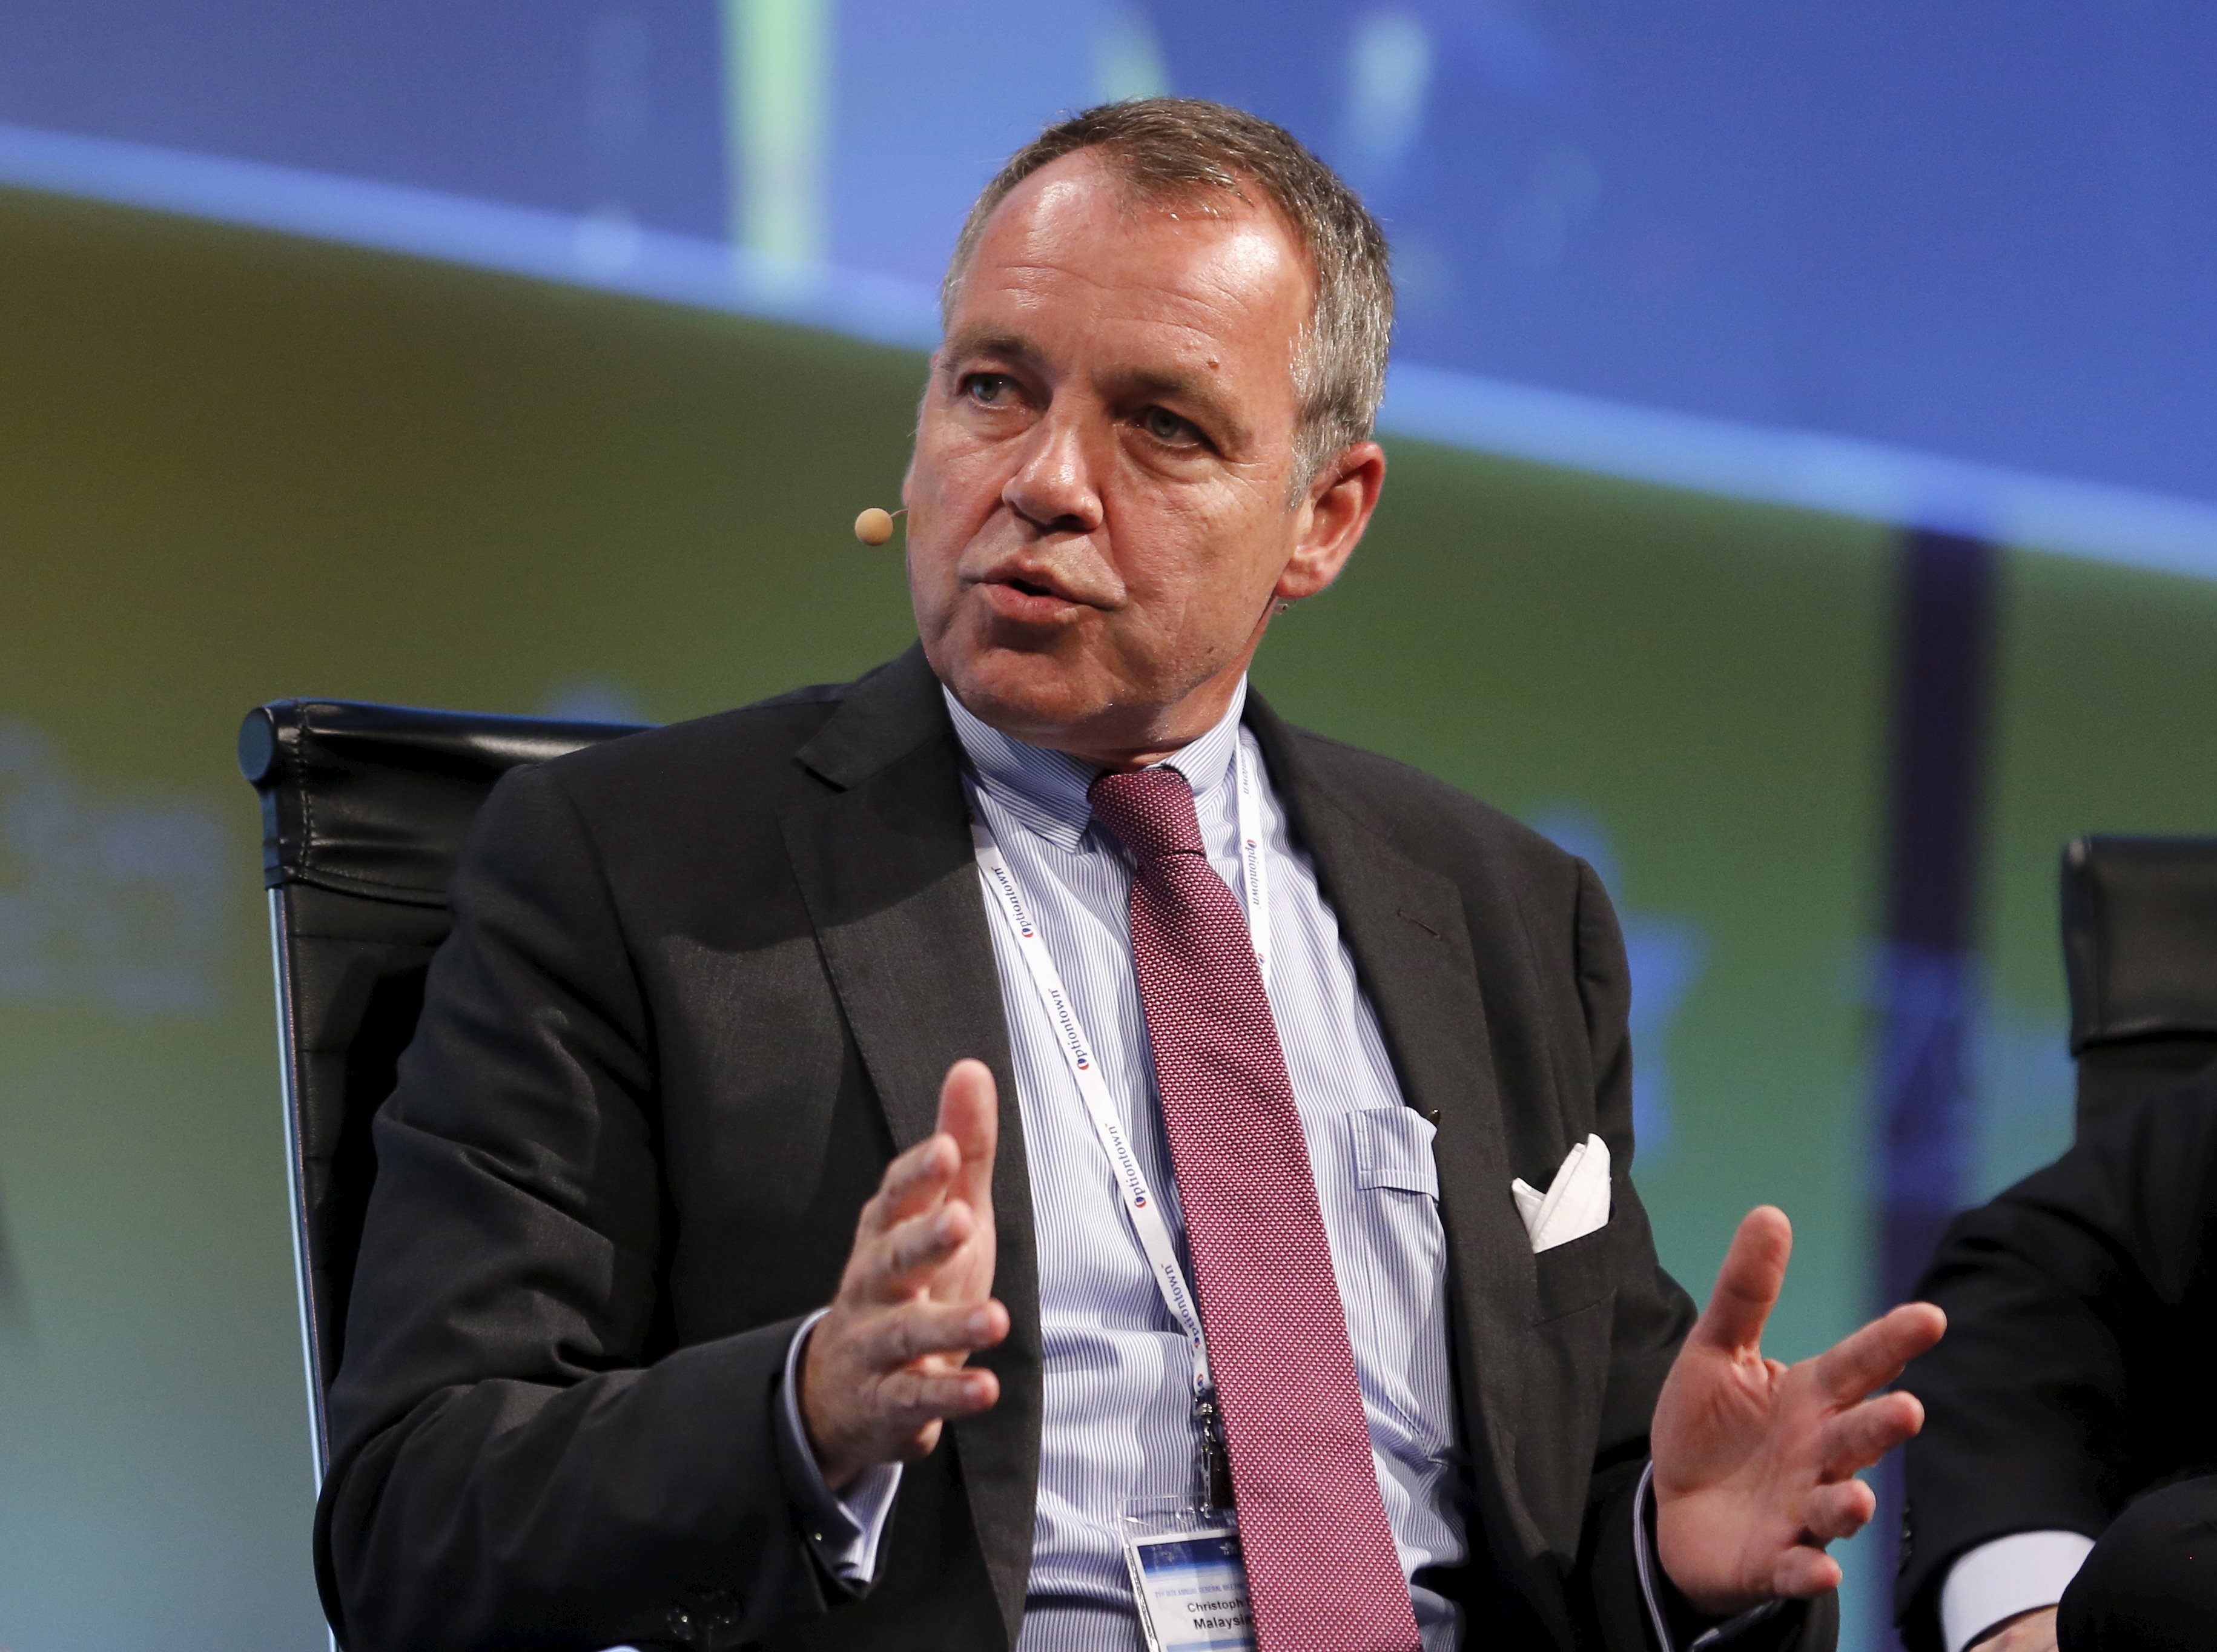 Christoph Mueller, CEO of Malaysia Airlines, speaks during a panel discussion at the 2015  International Air Transport Association (IATA) Annual General Meeting (AGM) and World Air Transport Summit in Miami Beach